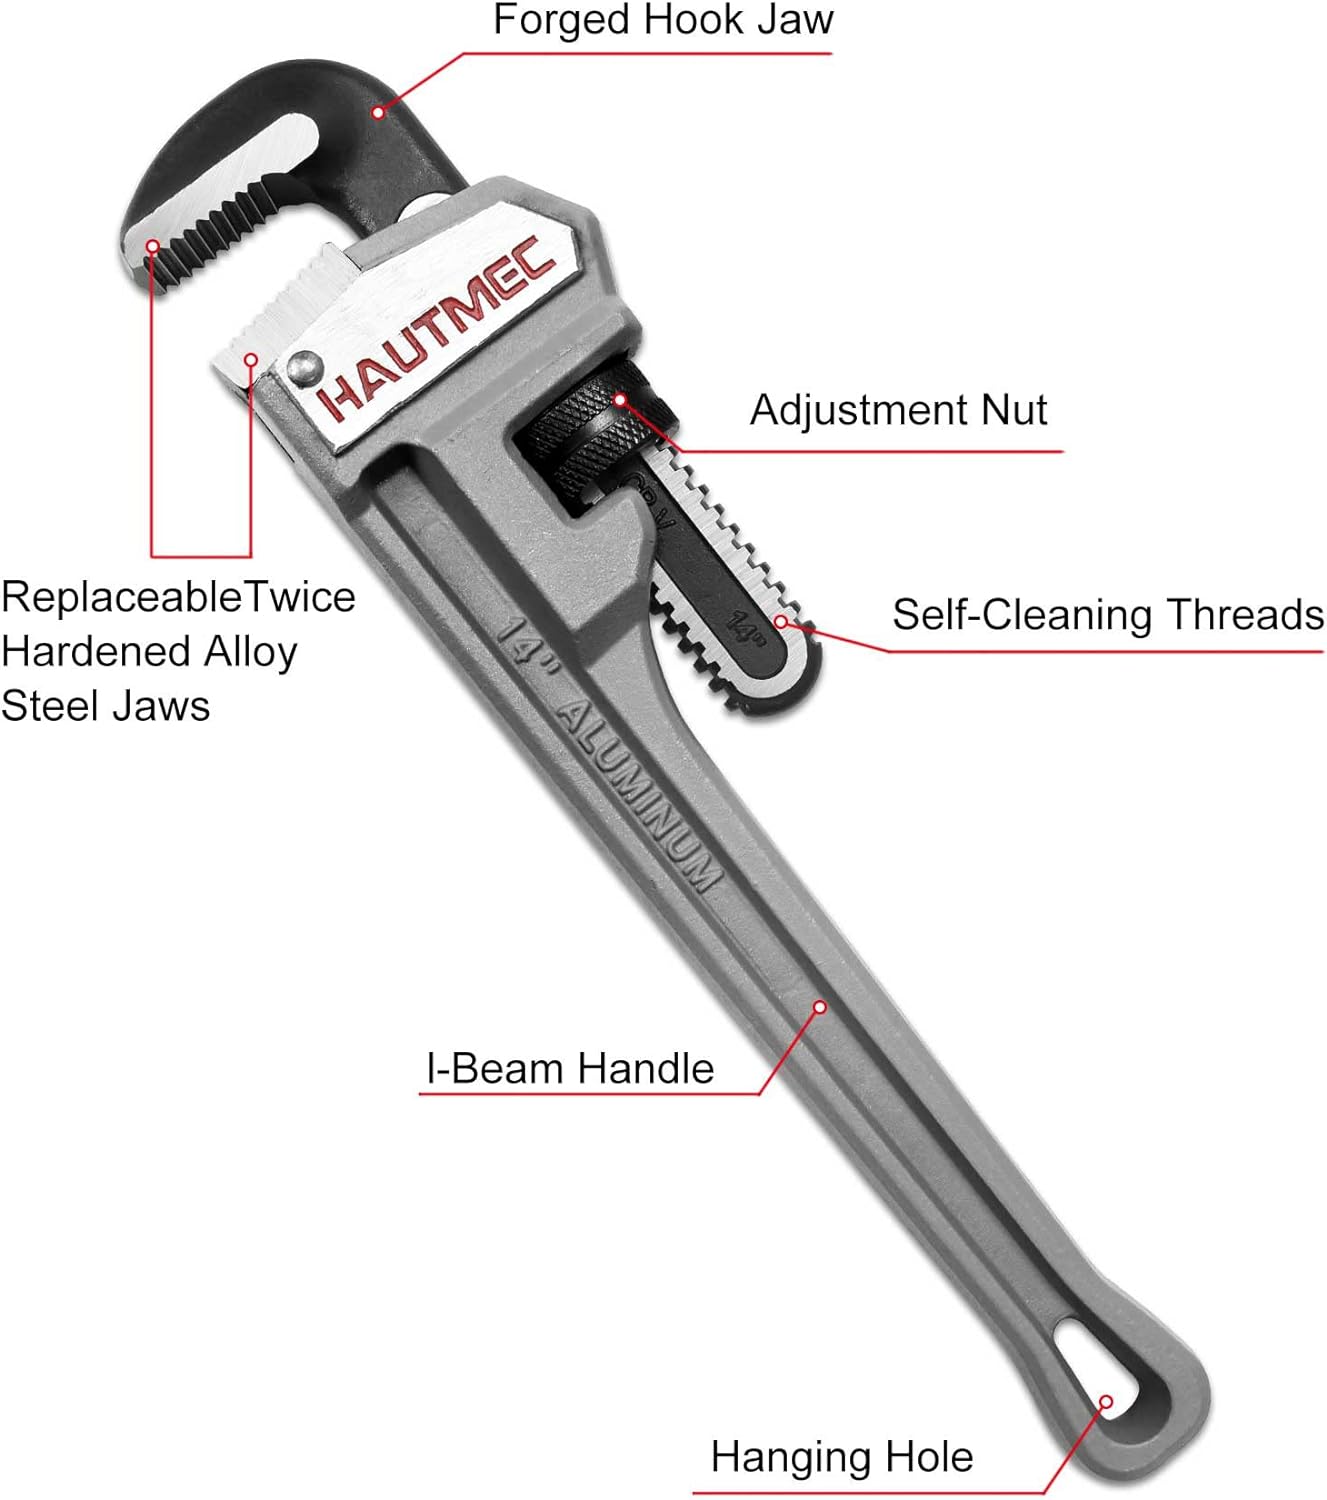 HAUTMEC 14 Inch Aluminum Straight Pipe Wrench, Adjustable Plumbing Wrench, 2" Jaw Capacity, Heavy Duty Plumbing Pipe Wrench, for Pipes, Tees, Ball Valves and Other Objects HT0021-PW